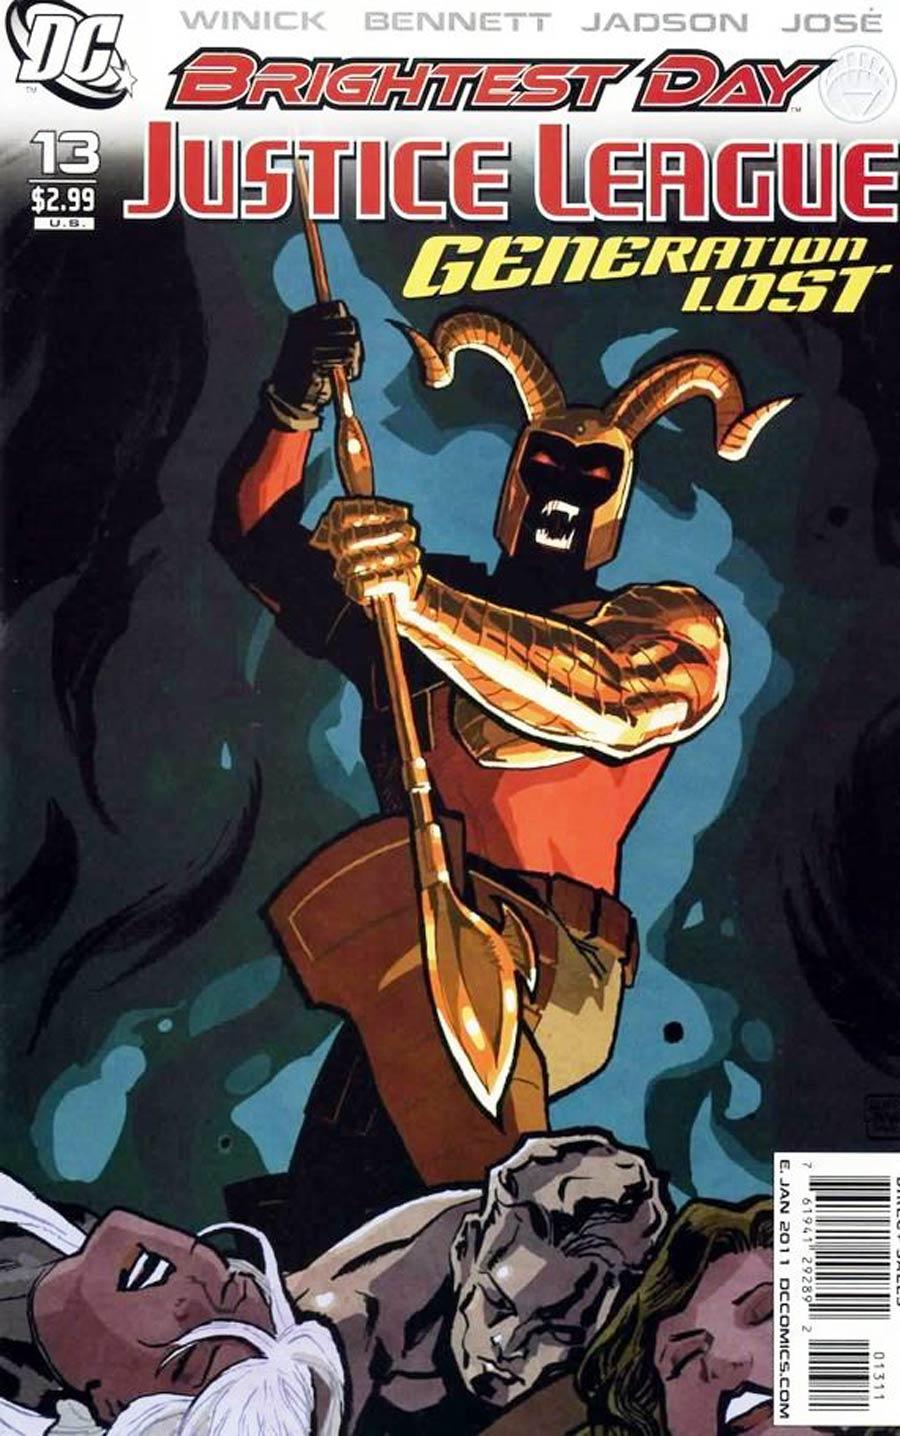 Justice League Generation Lost #13 Cover A Regular Cliff Chiang Cover (Brightest Day Tie-In)